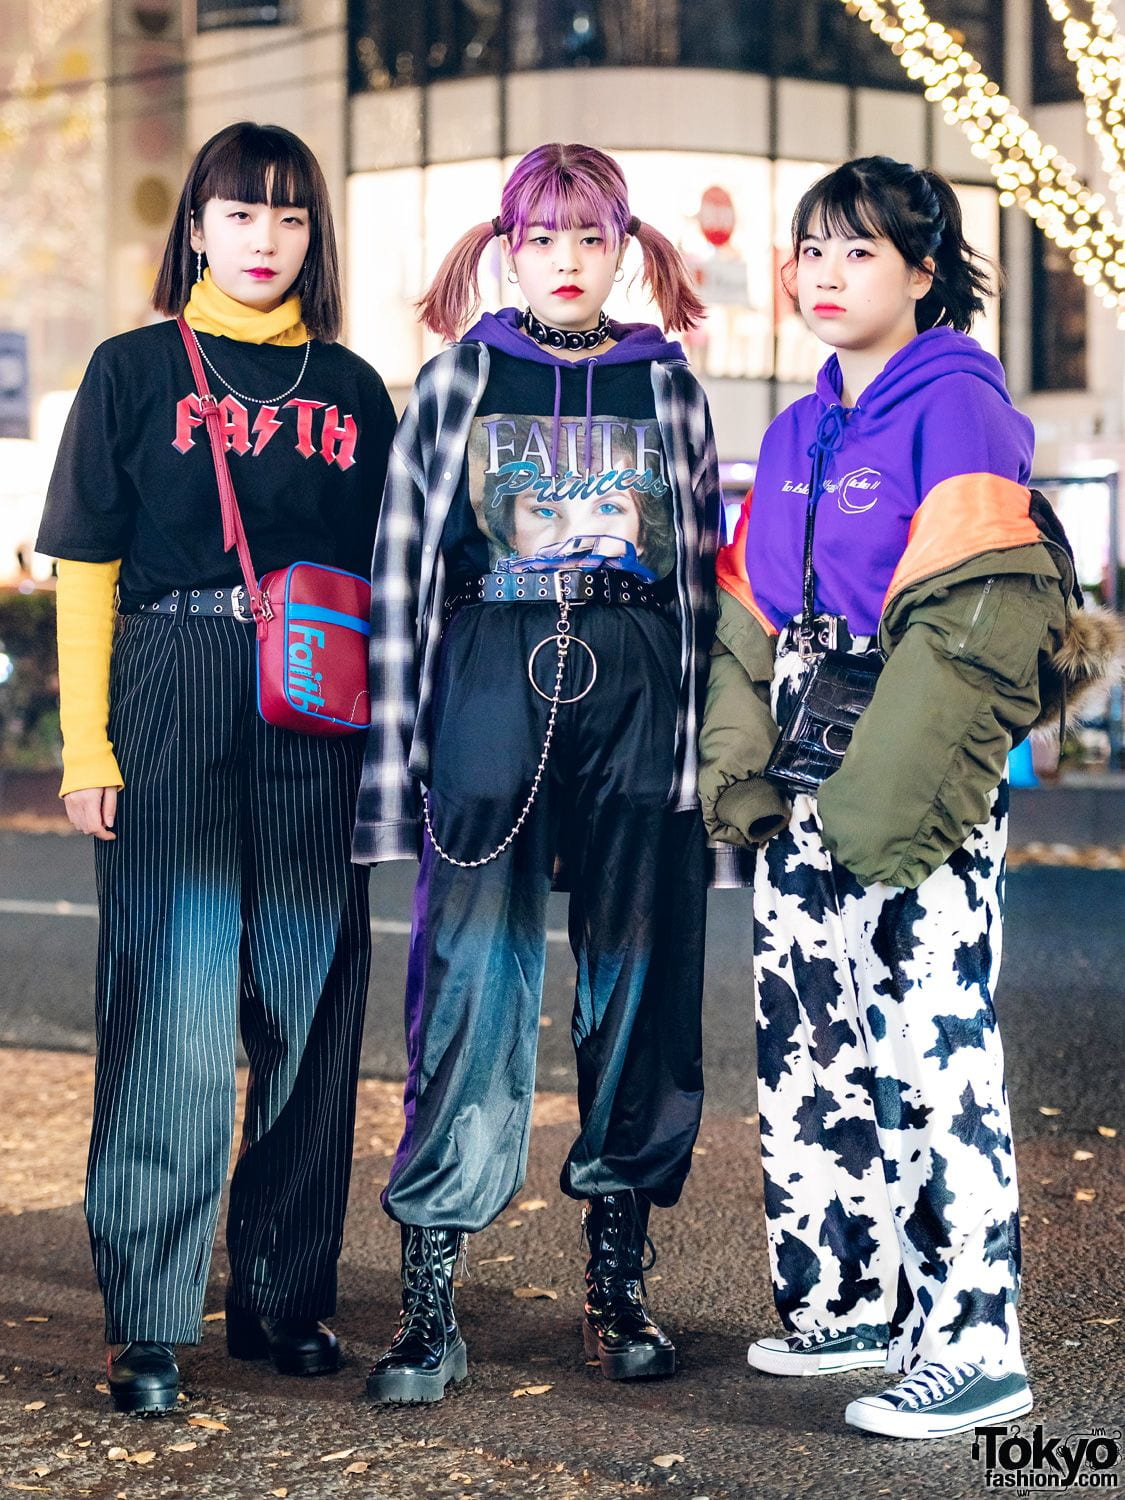 modern japanese streetwear styles – No, Where Are You REALLY From?